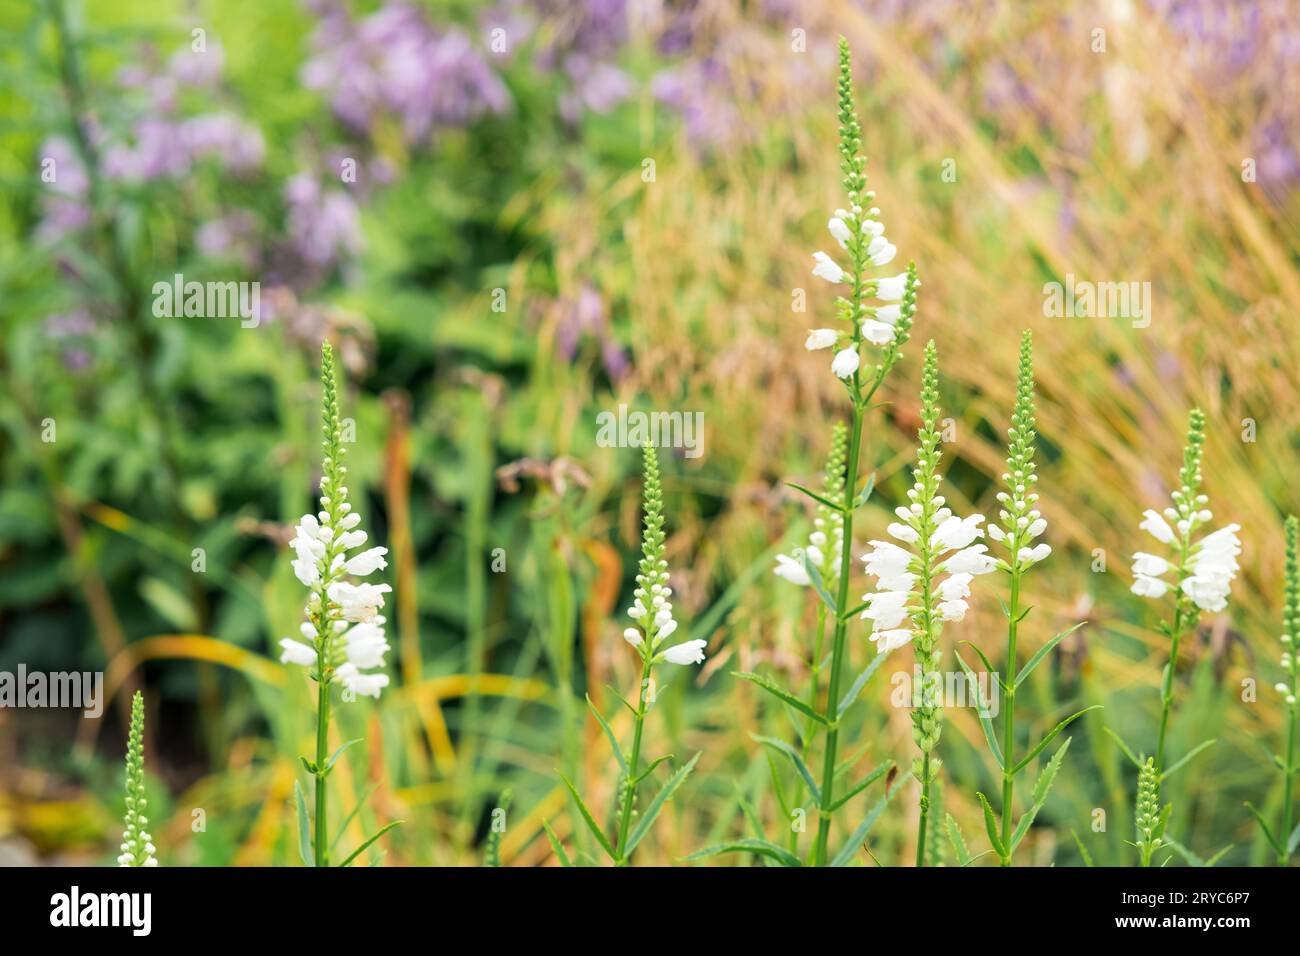 white physostegia flowers outdoor  on a blurred natural background Stock Photo